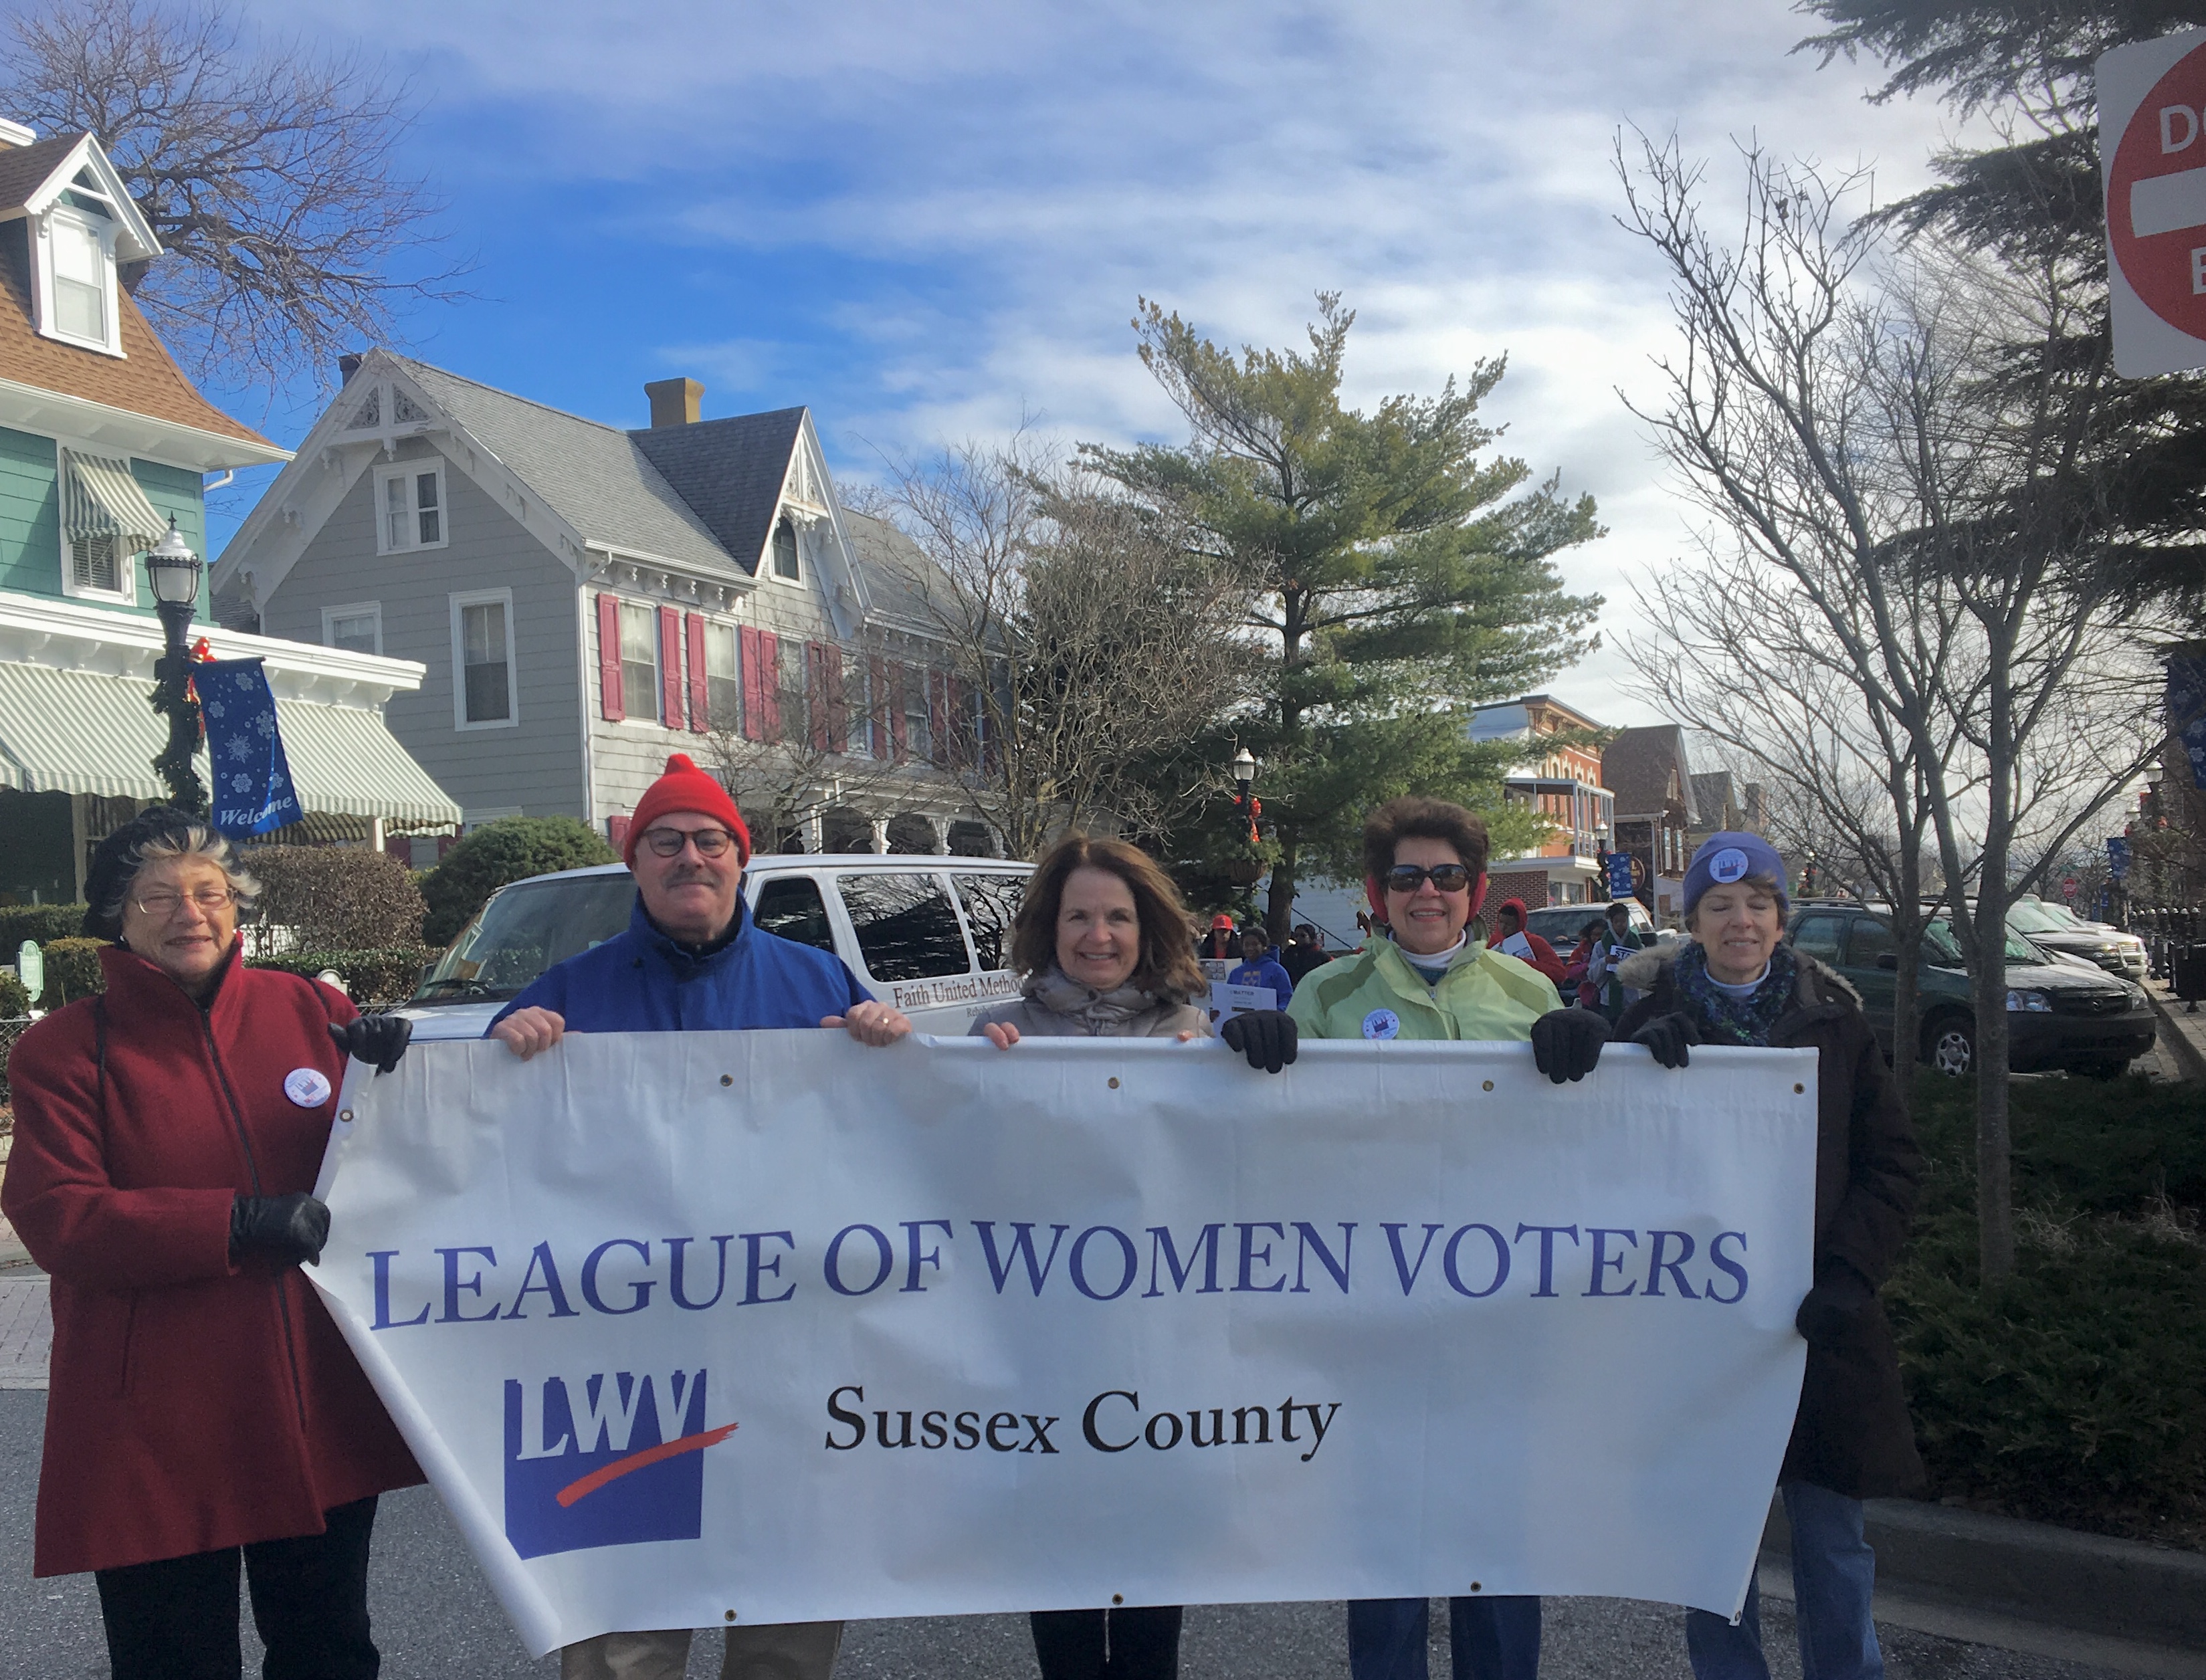 League of Women Voters of Sussex County members march in MLK, Jr parage January, 2017